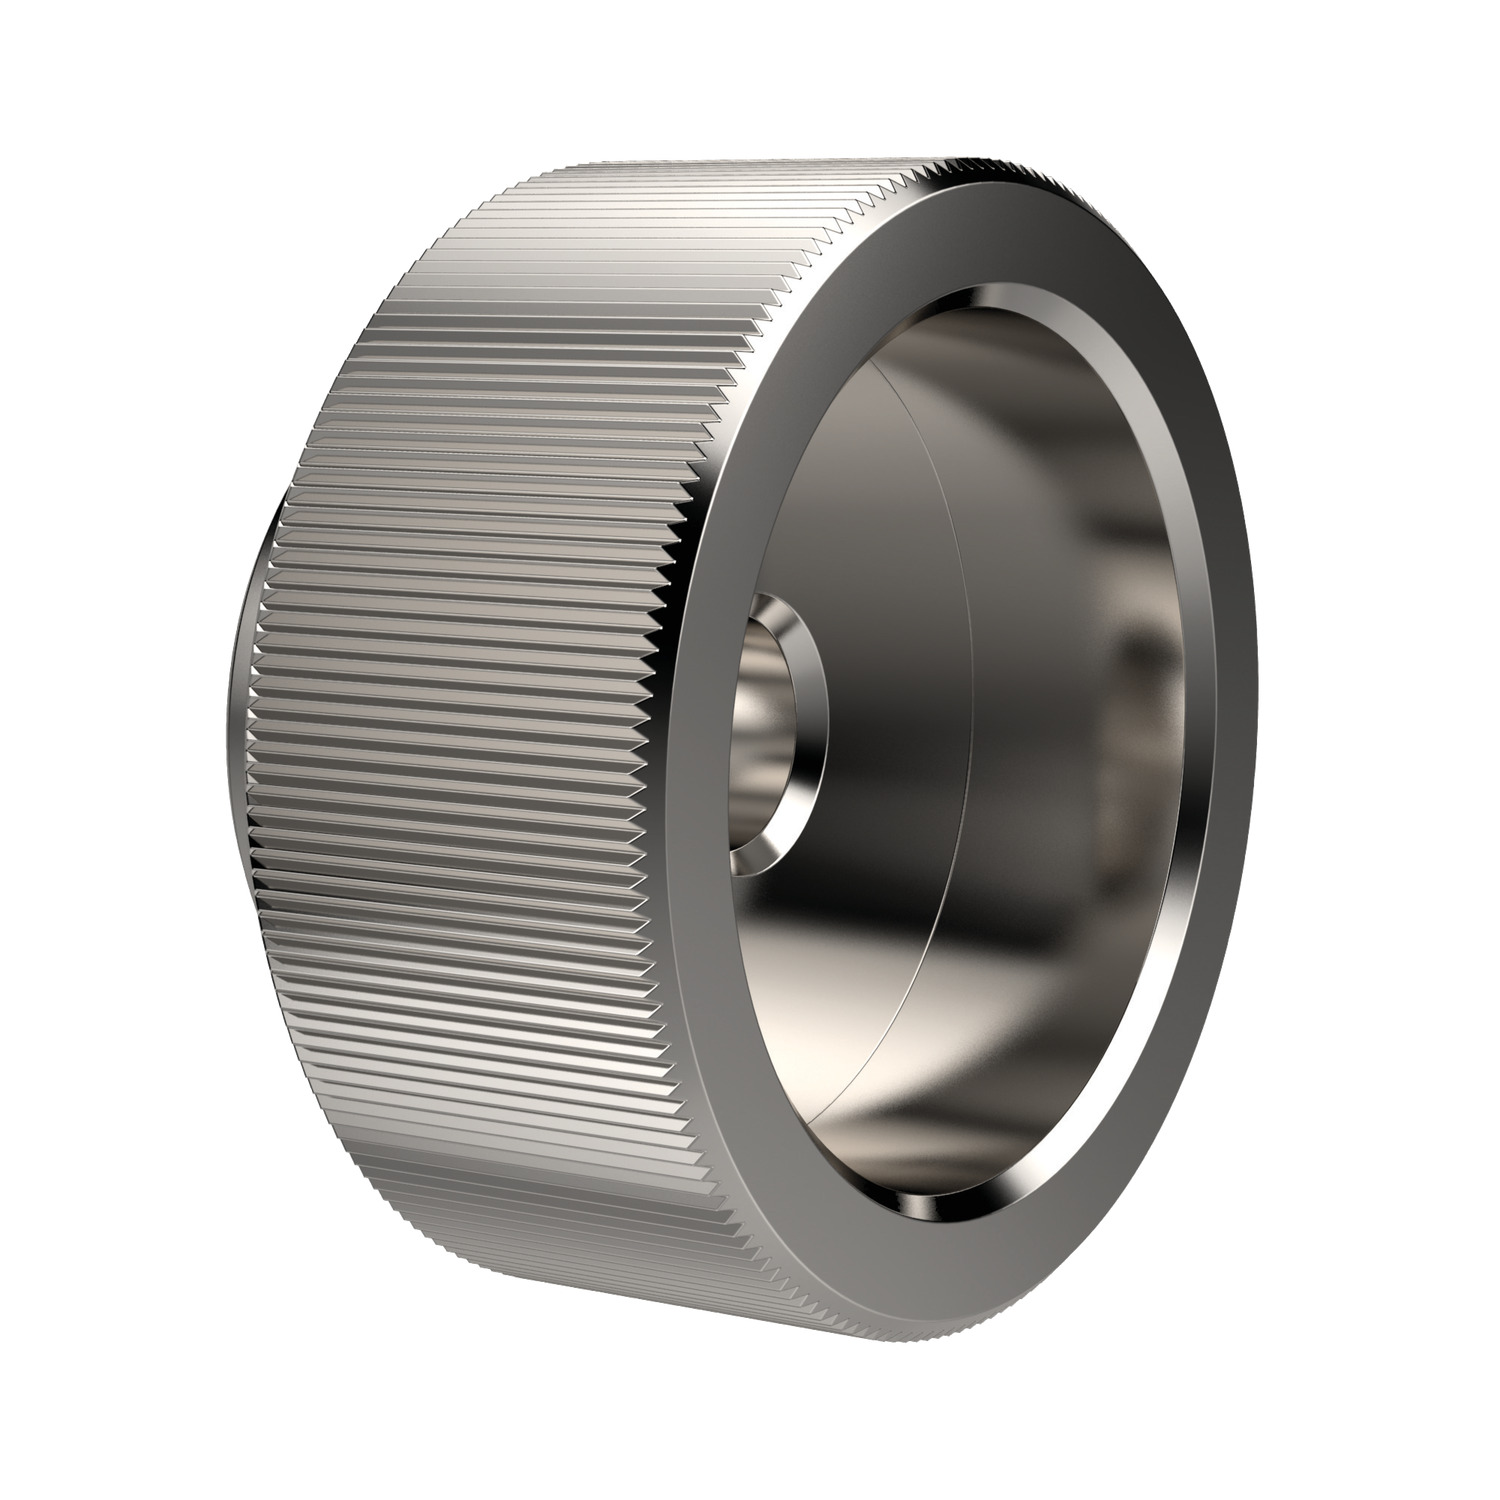 Product P0409.A2, Knurled Nuts stainless steel - DIN 6303 / 